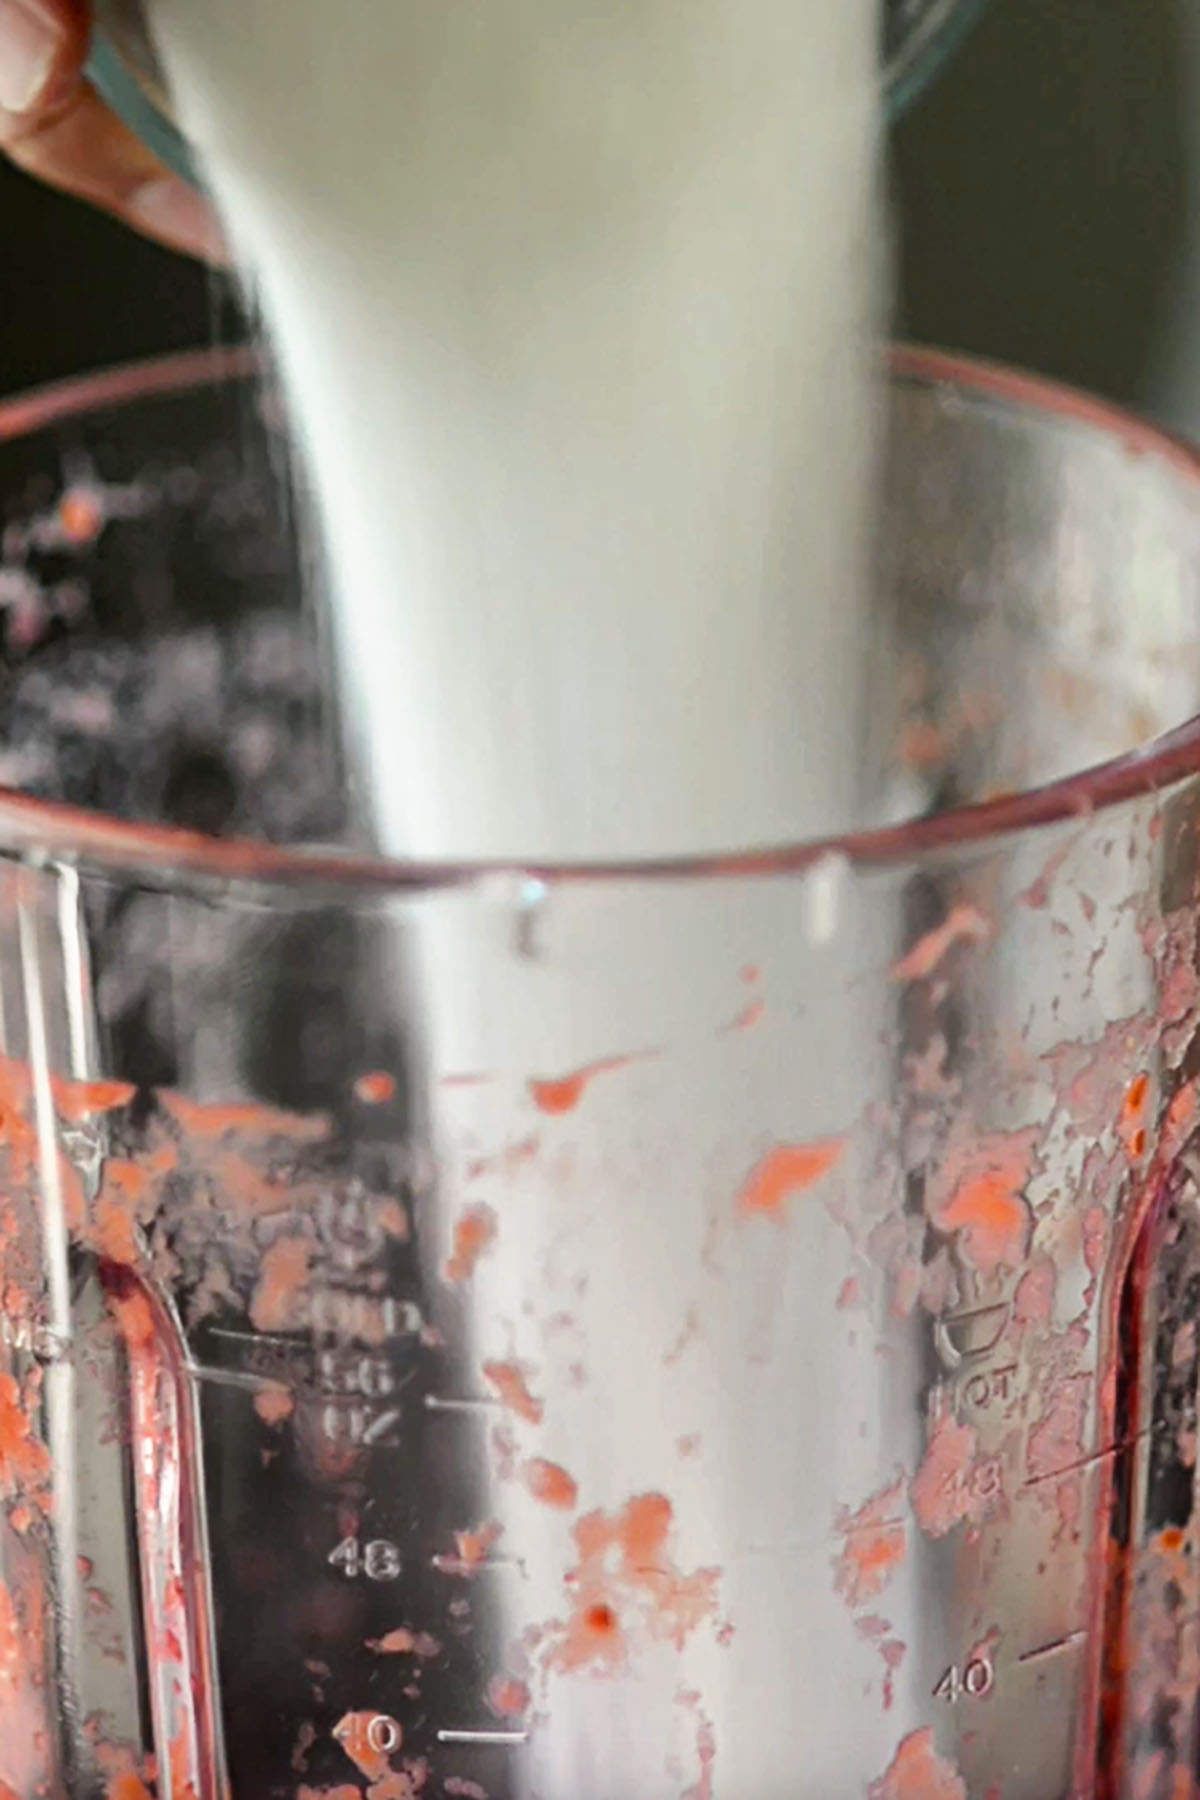 Sugar being poured into a blender.